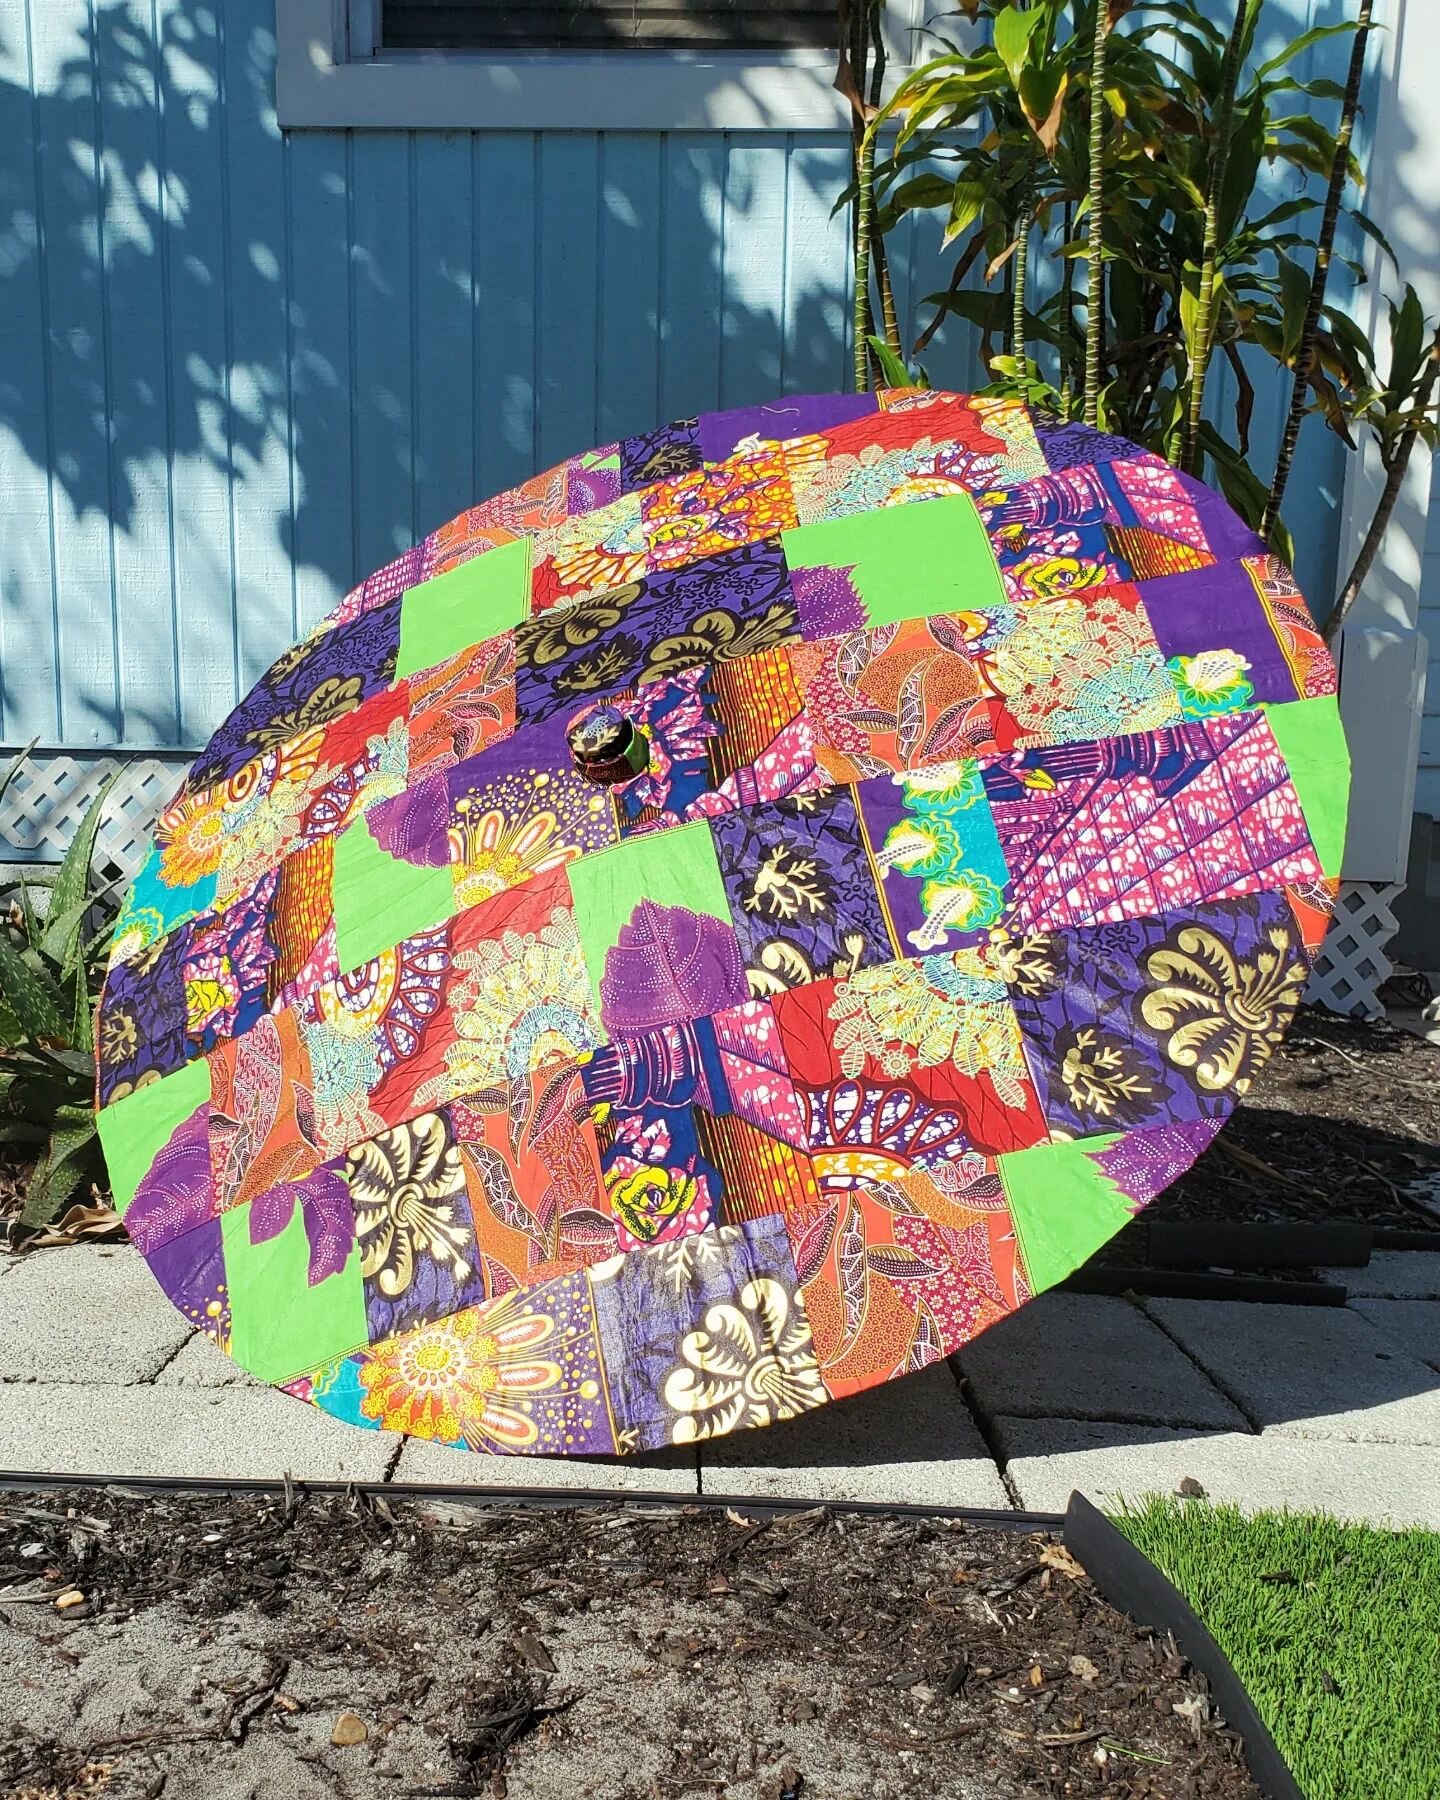 SOLD, $620

'Bolivianite' Large Bespoke Quilt Parasol

Bolivianite contains powerful calming and balancing energies for deep grounding into Mother Earth during deep meditative sessions. New levels of openness and acceptance emerge. Dreams and desires